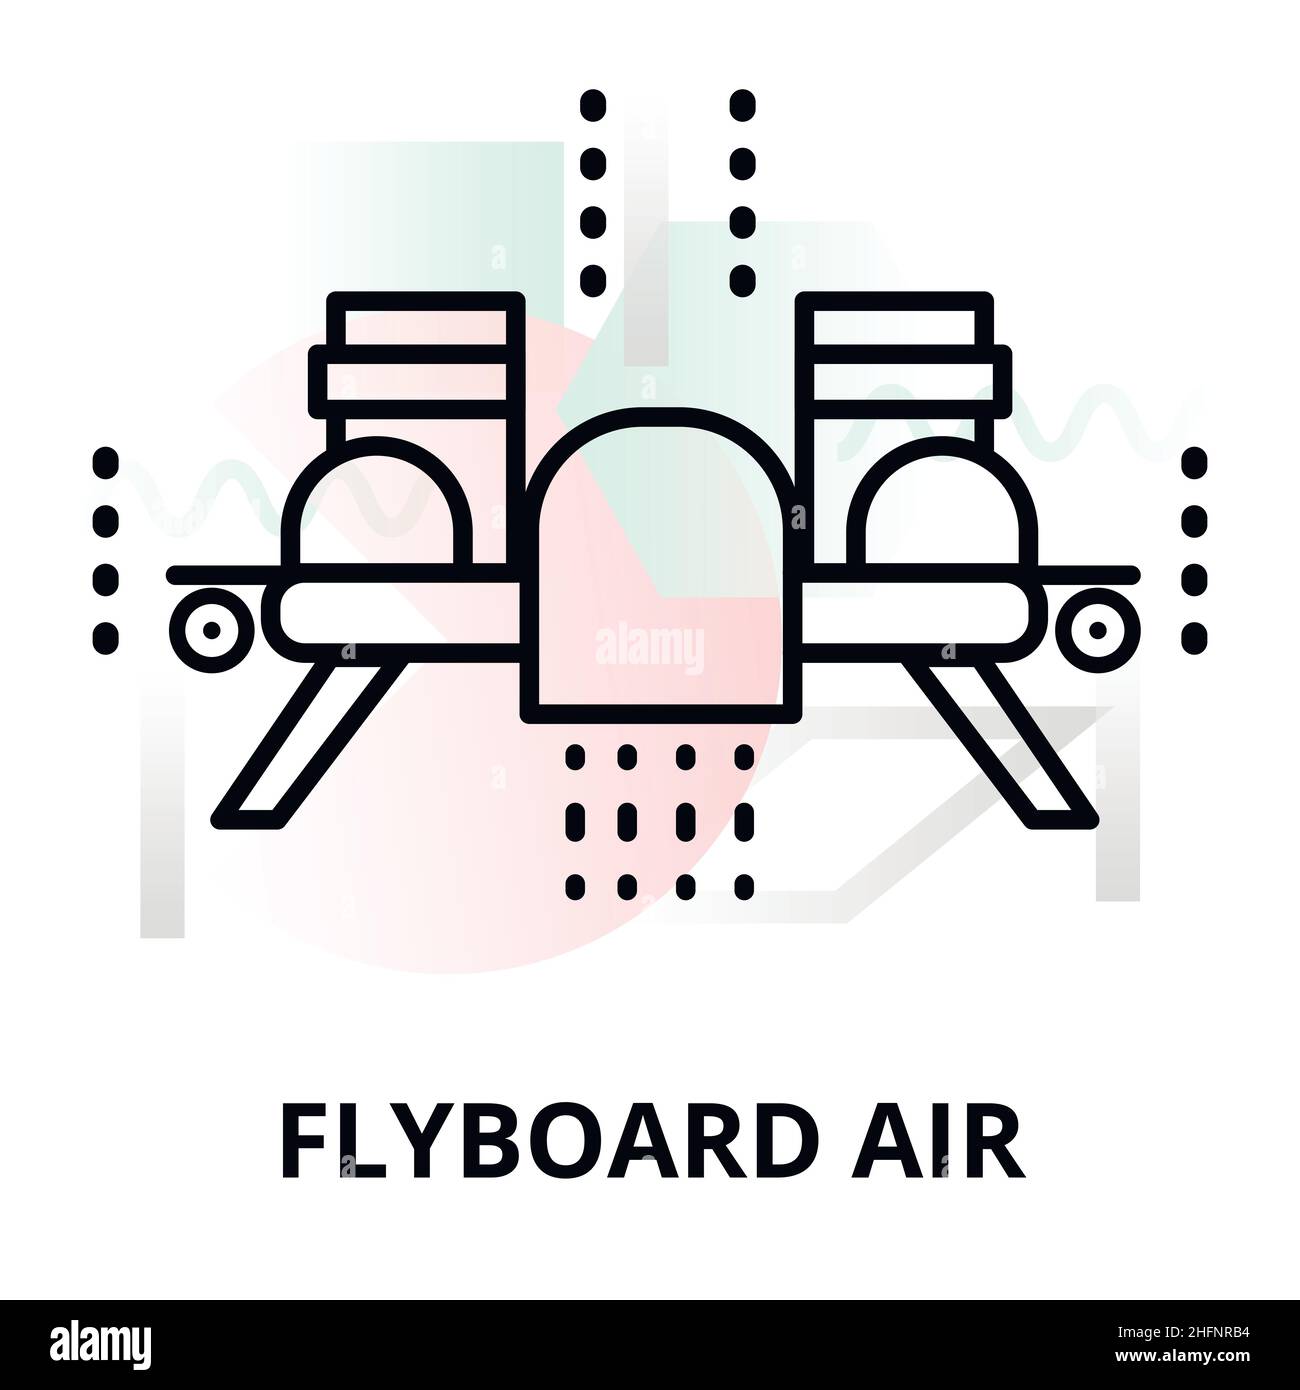 Abstract icon of future technology - flyboard air on color geometric shapes background, for graphic and web design Stock Vector